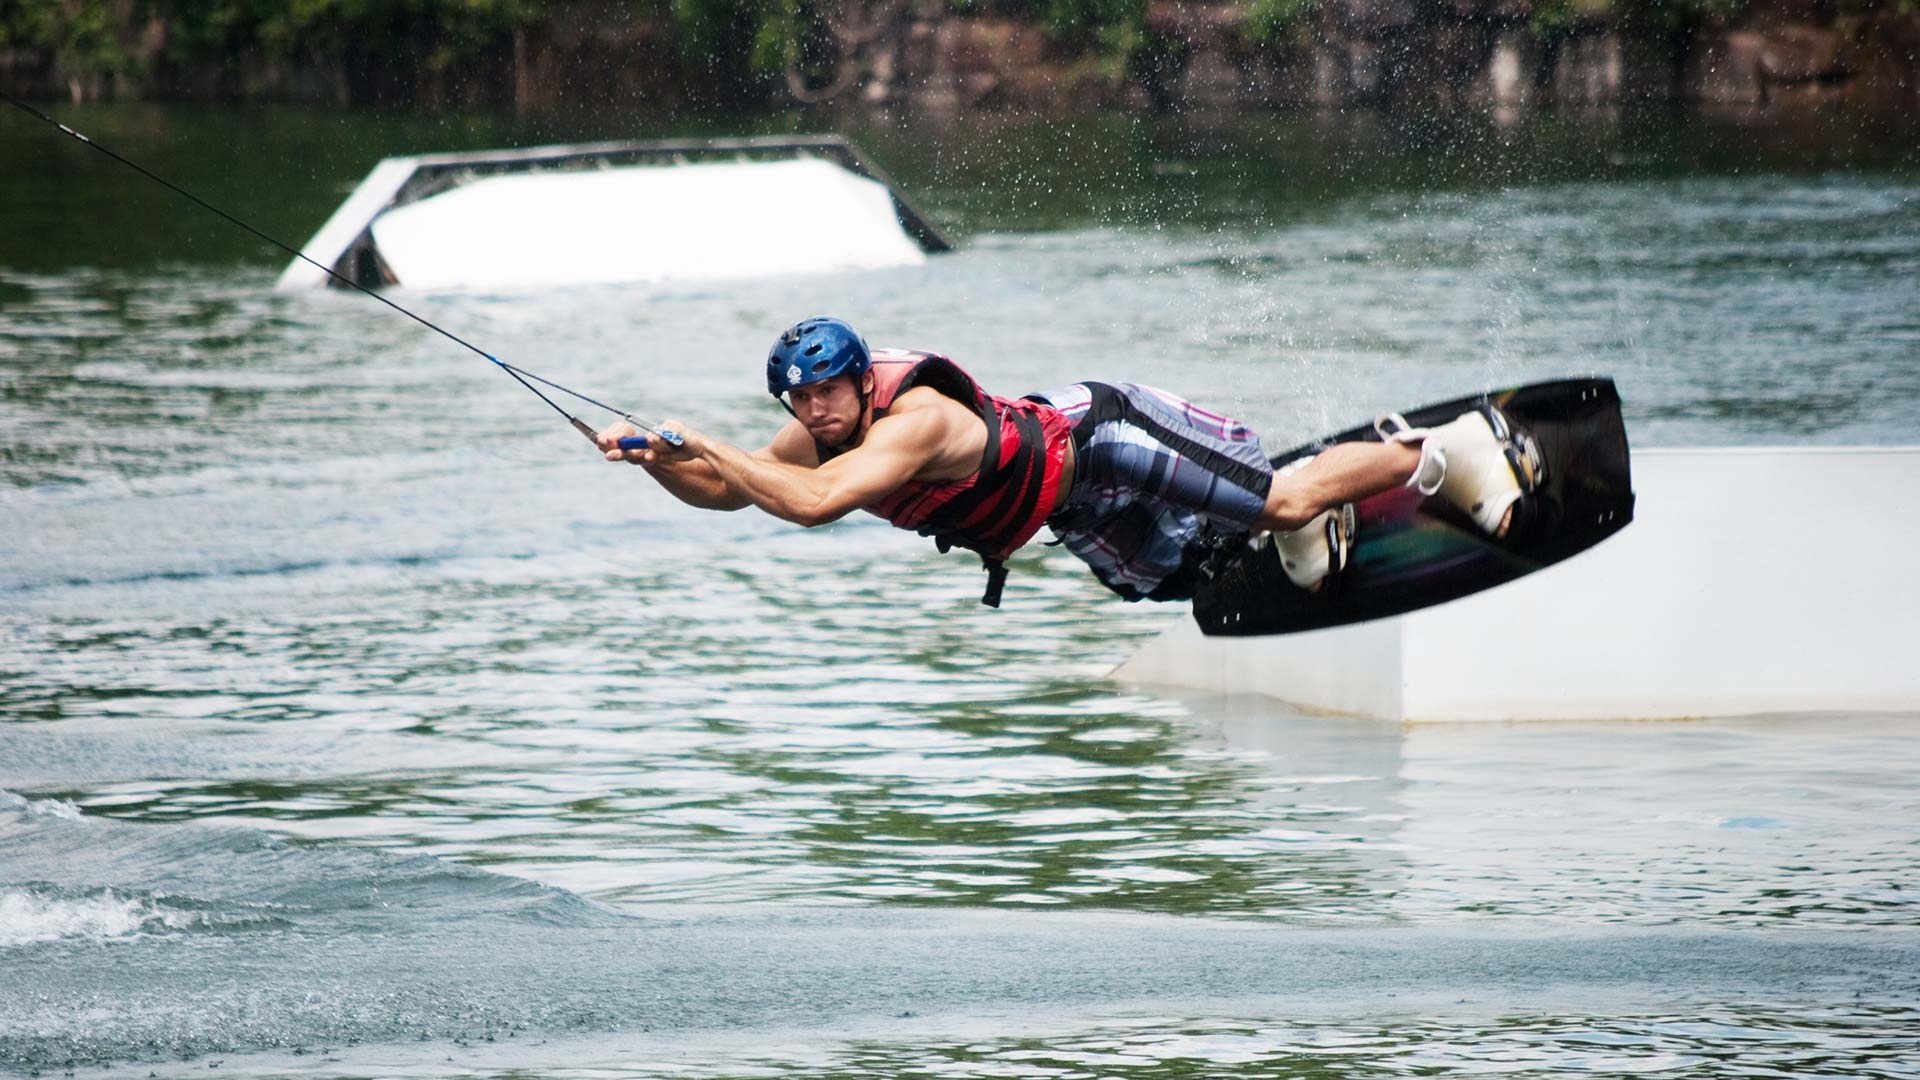 Wakeboarding at Brownstone Park, Cable wakeboarding fun, Exciting water park, Thrilling rides, 1920x1080 Full HD Desktop